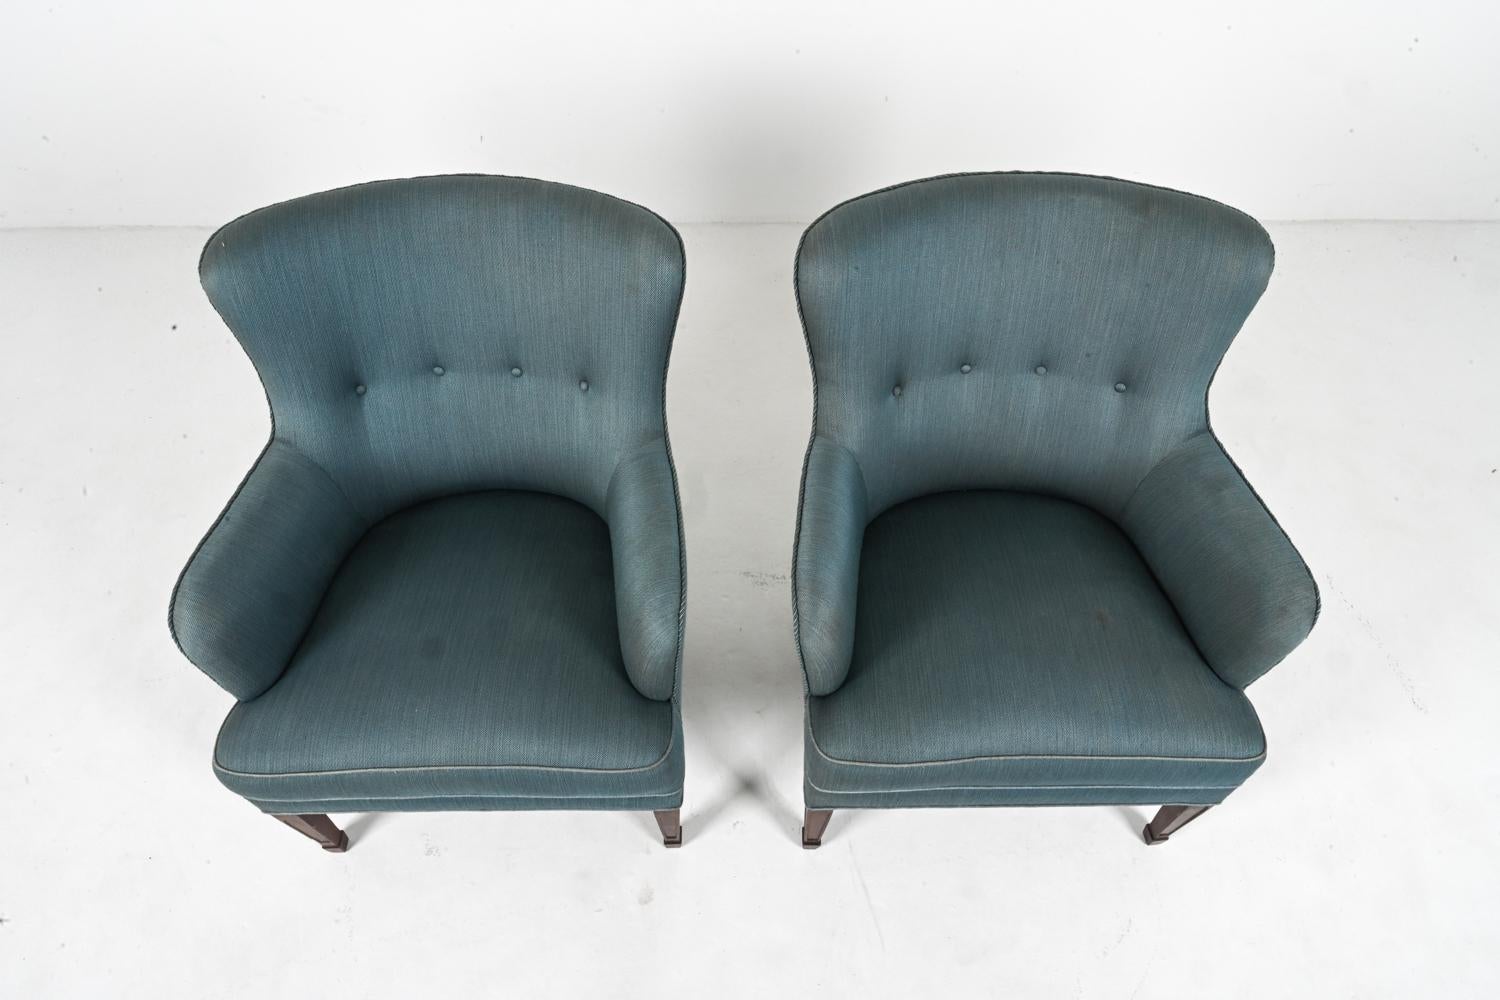 Pair of Frits Henningsen Easy Chairs in Mahogany, c. 1940's In Fair Condition For Sale In Norwalk, CT